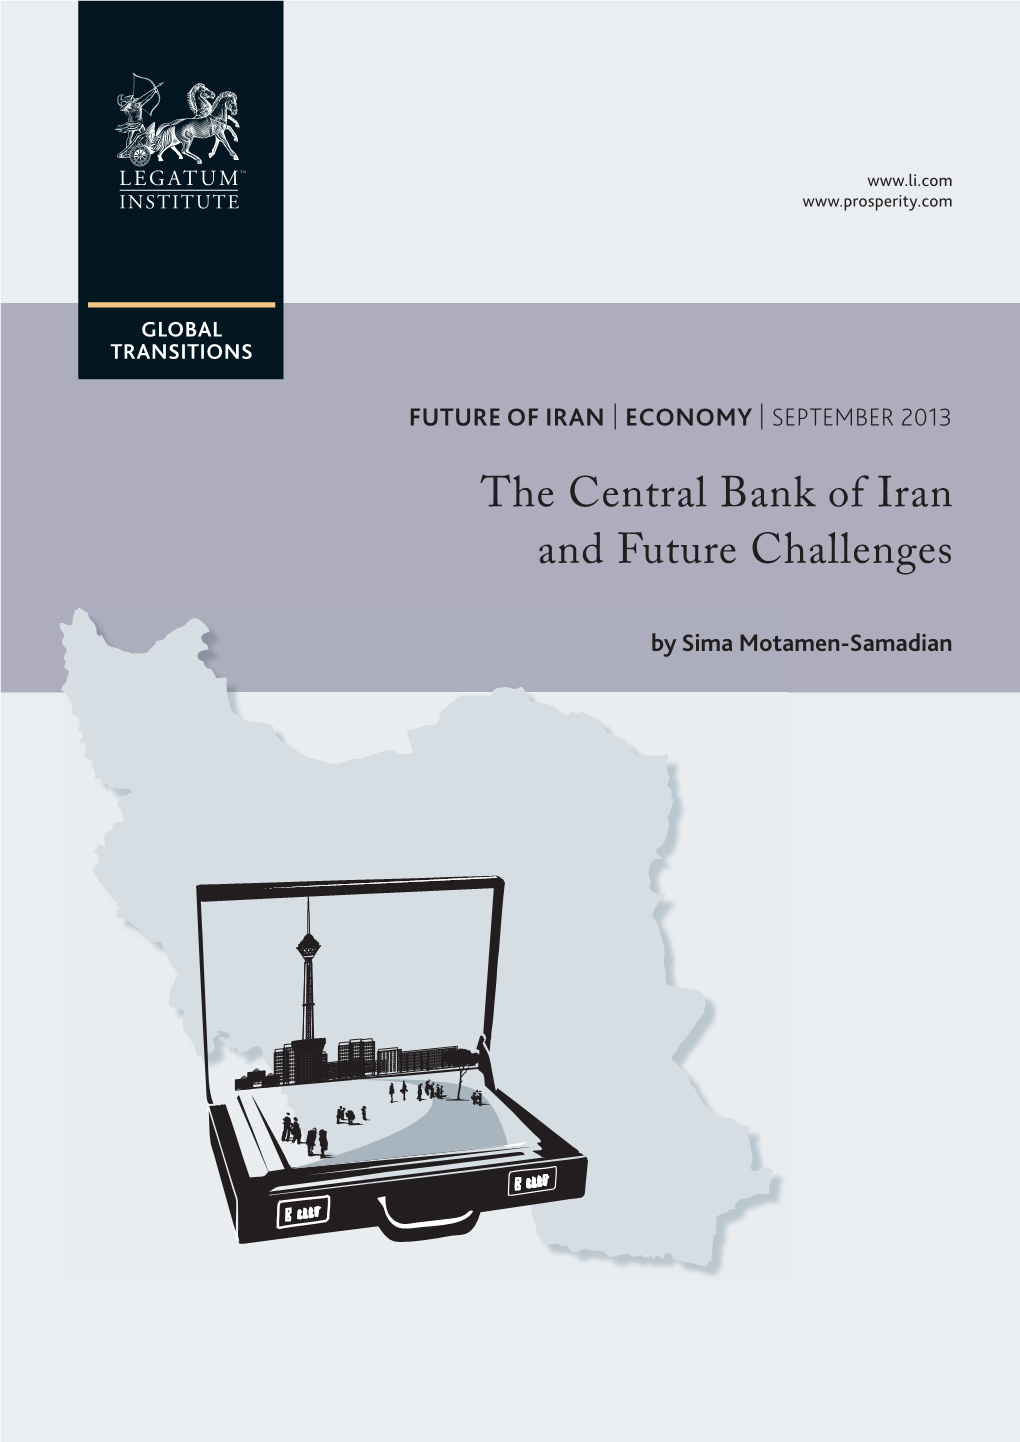 The Central Bank of Iran and Future Challenges